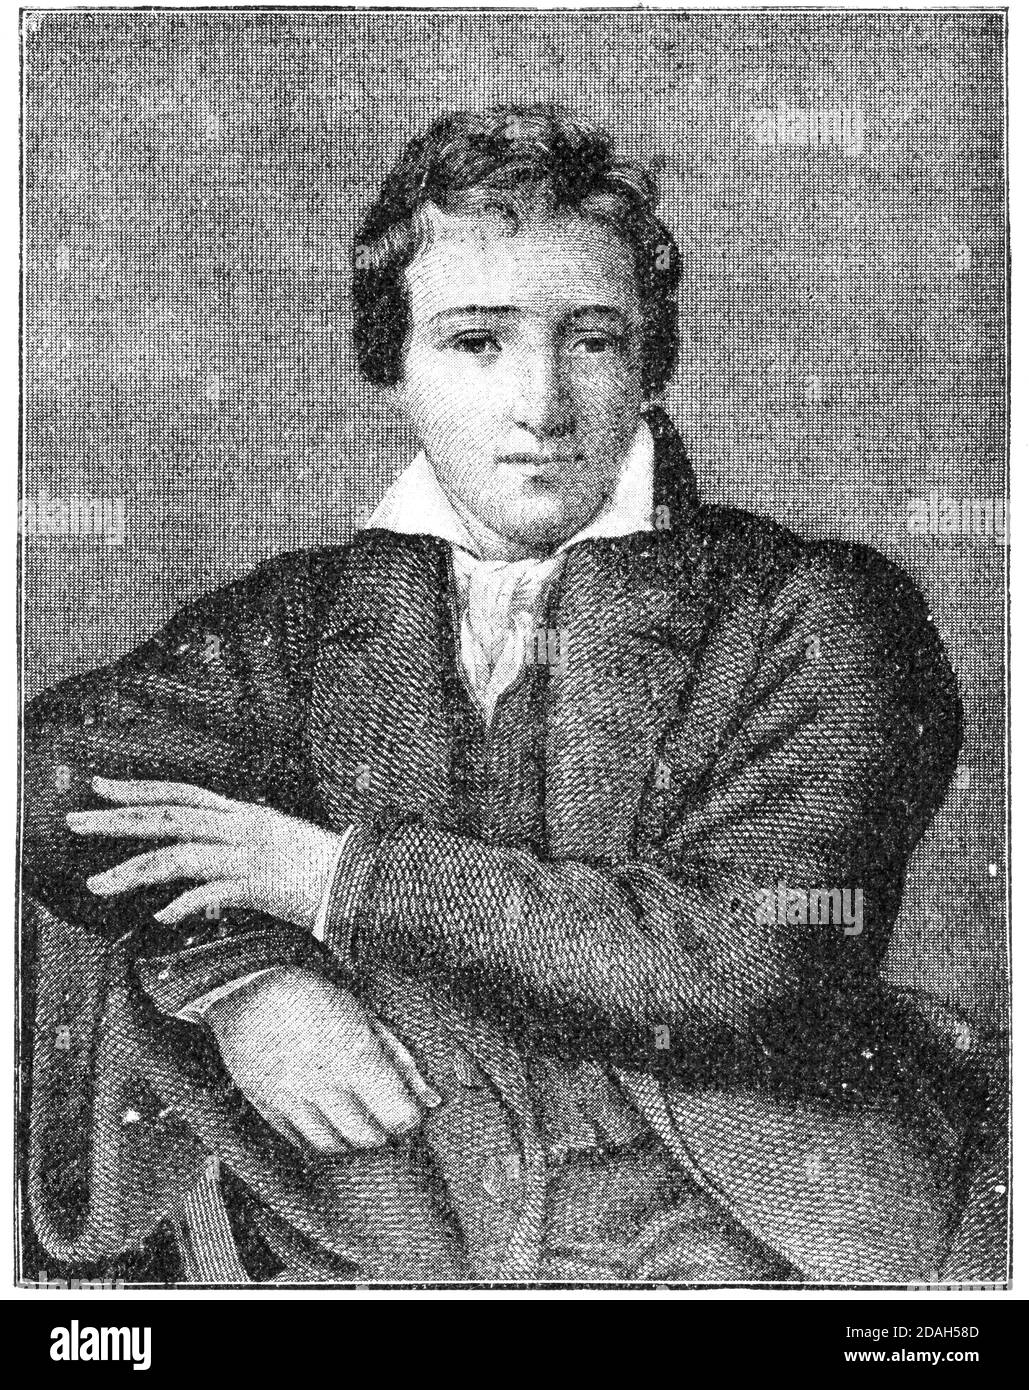 Portrait of Heinrich Heine (young years) - a German poet, writer and literary critic. Illustration of the 19th century. White background. Stock Photo